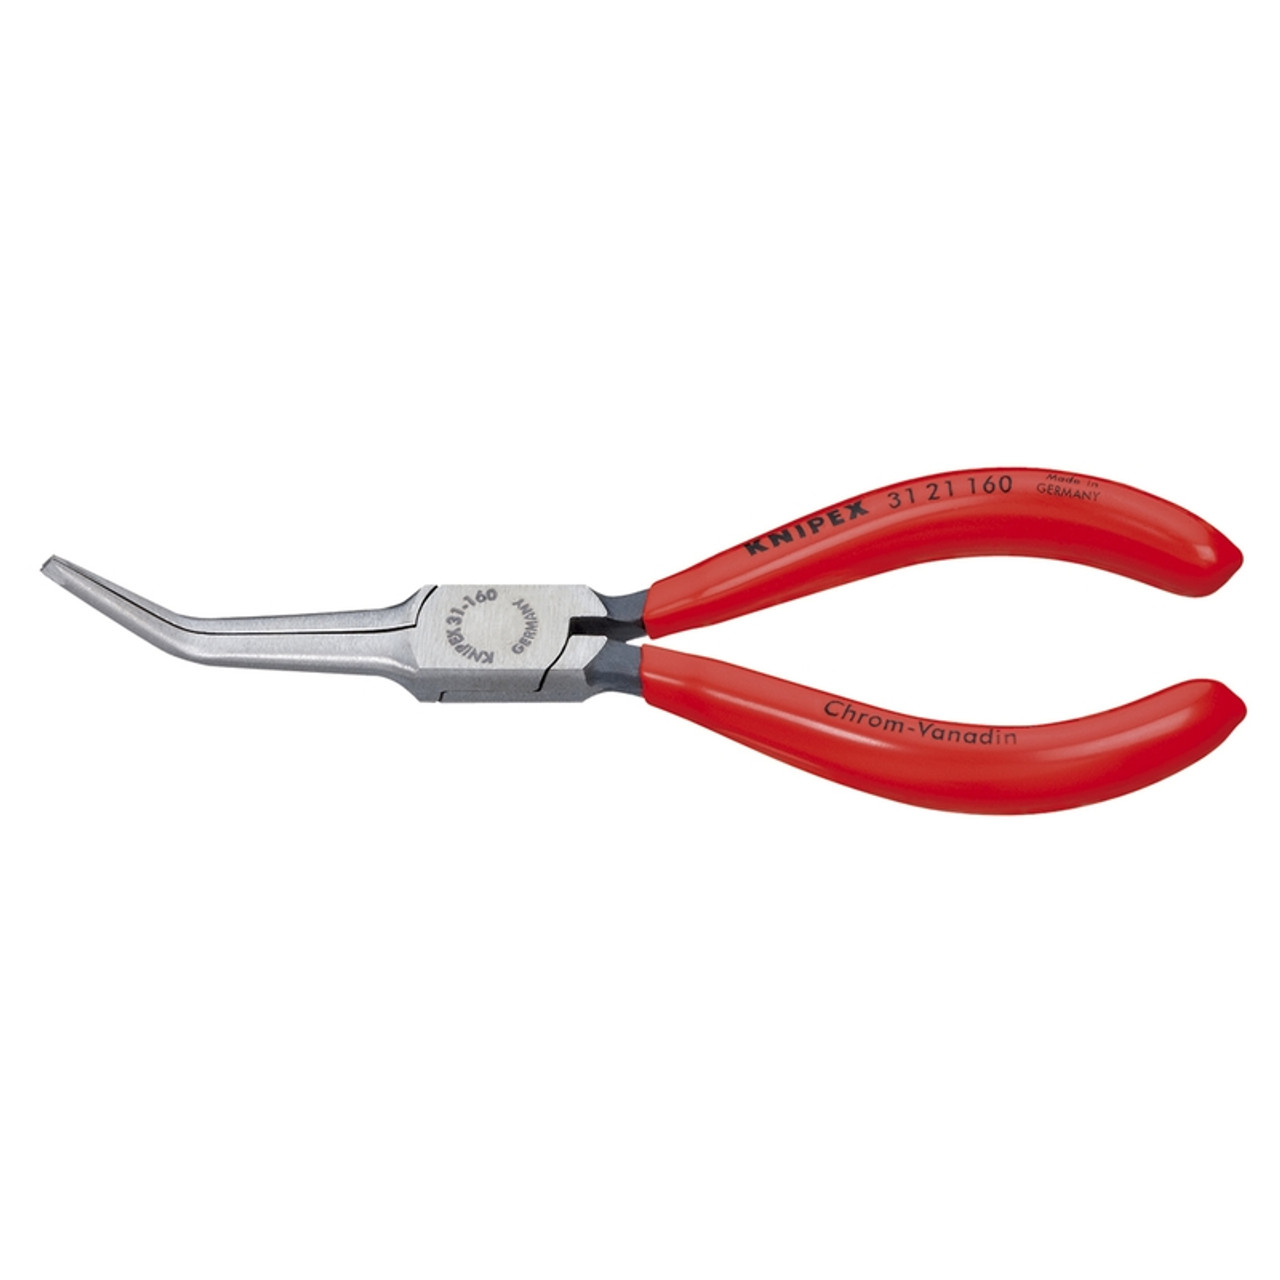 Knipex 28 71 280 SBA, 11 Extra Long Needle Nose Pliers - Straight